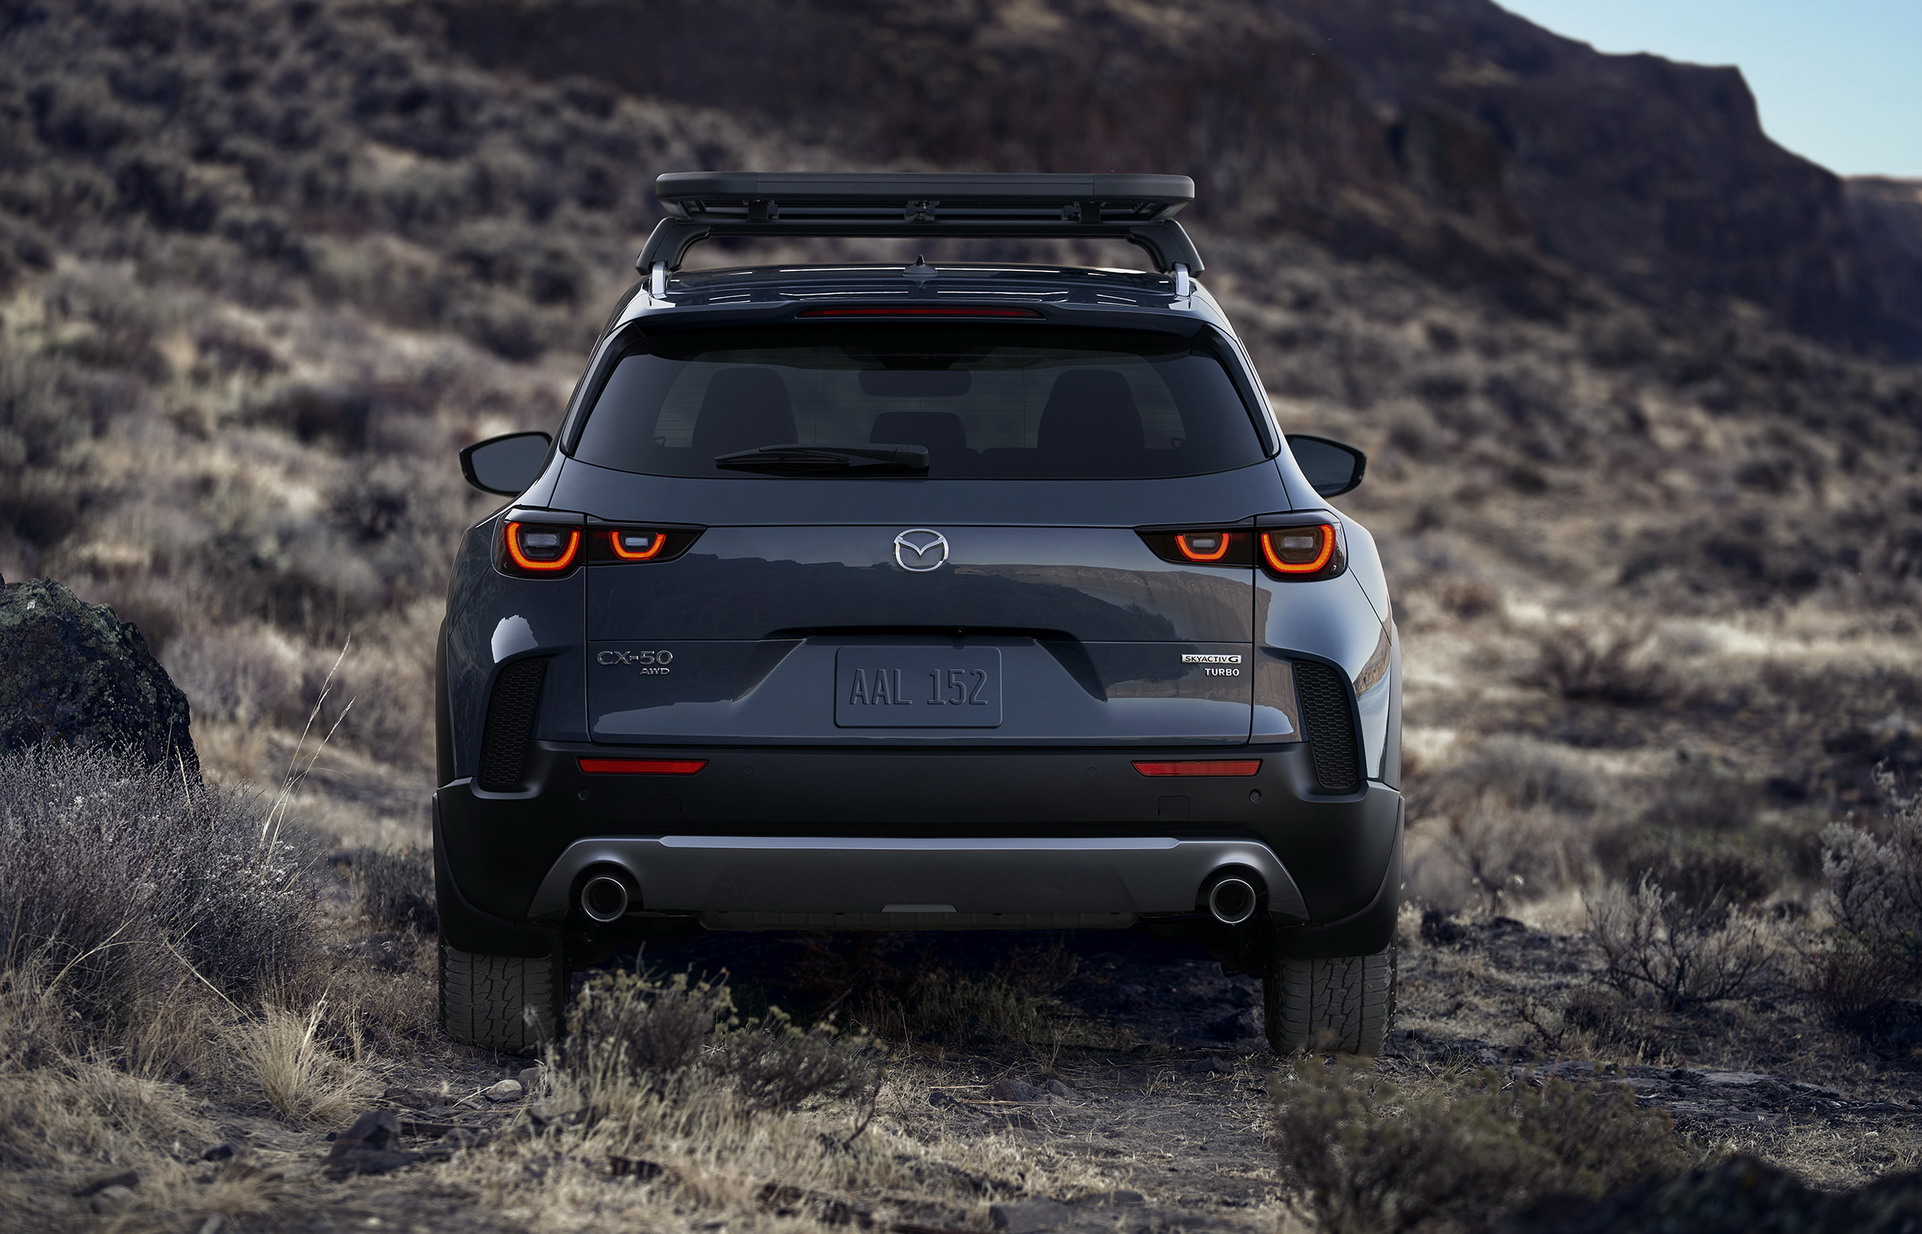 2023 Mazda CX50 Looks Ready To Conquer The Wilderness As CX5’s More